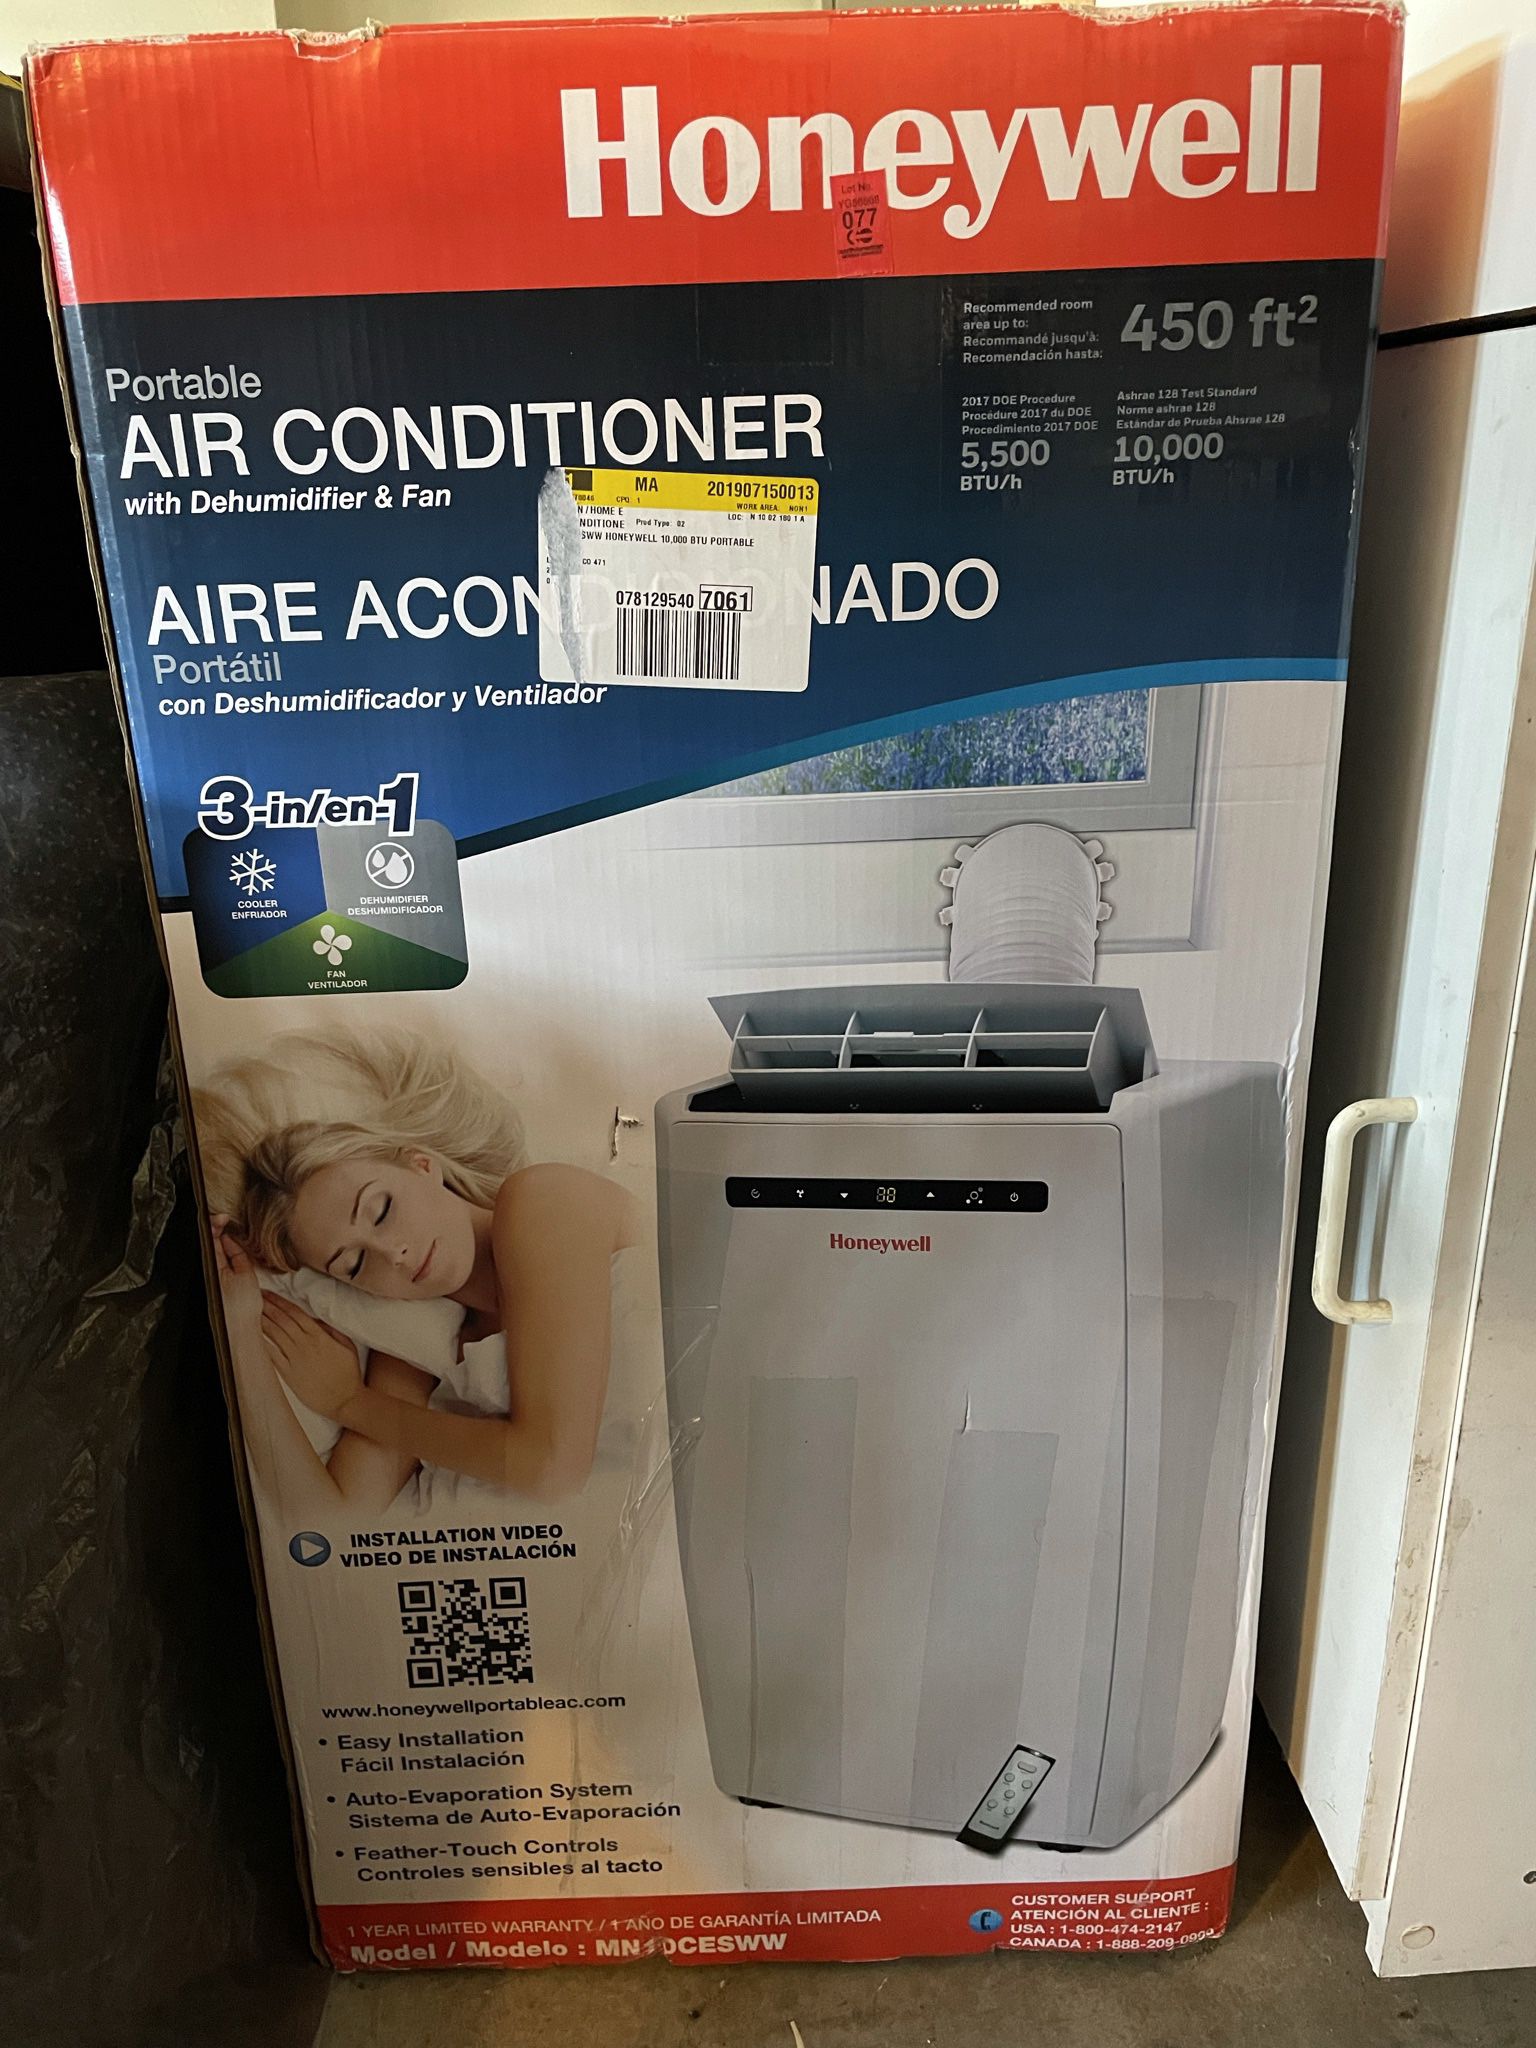 Honeywell MN10CESWW Portable Air Conditioner, 10,000 BTU Cooling, With Dehumidifier & Fan